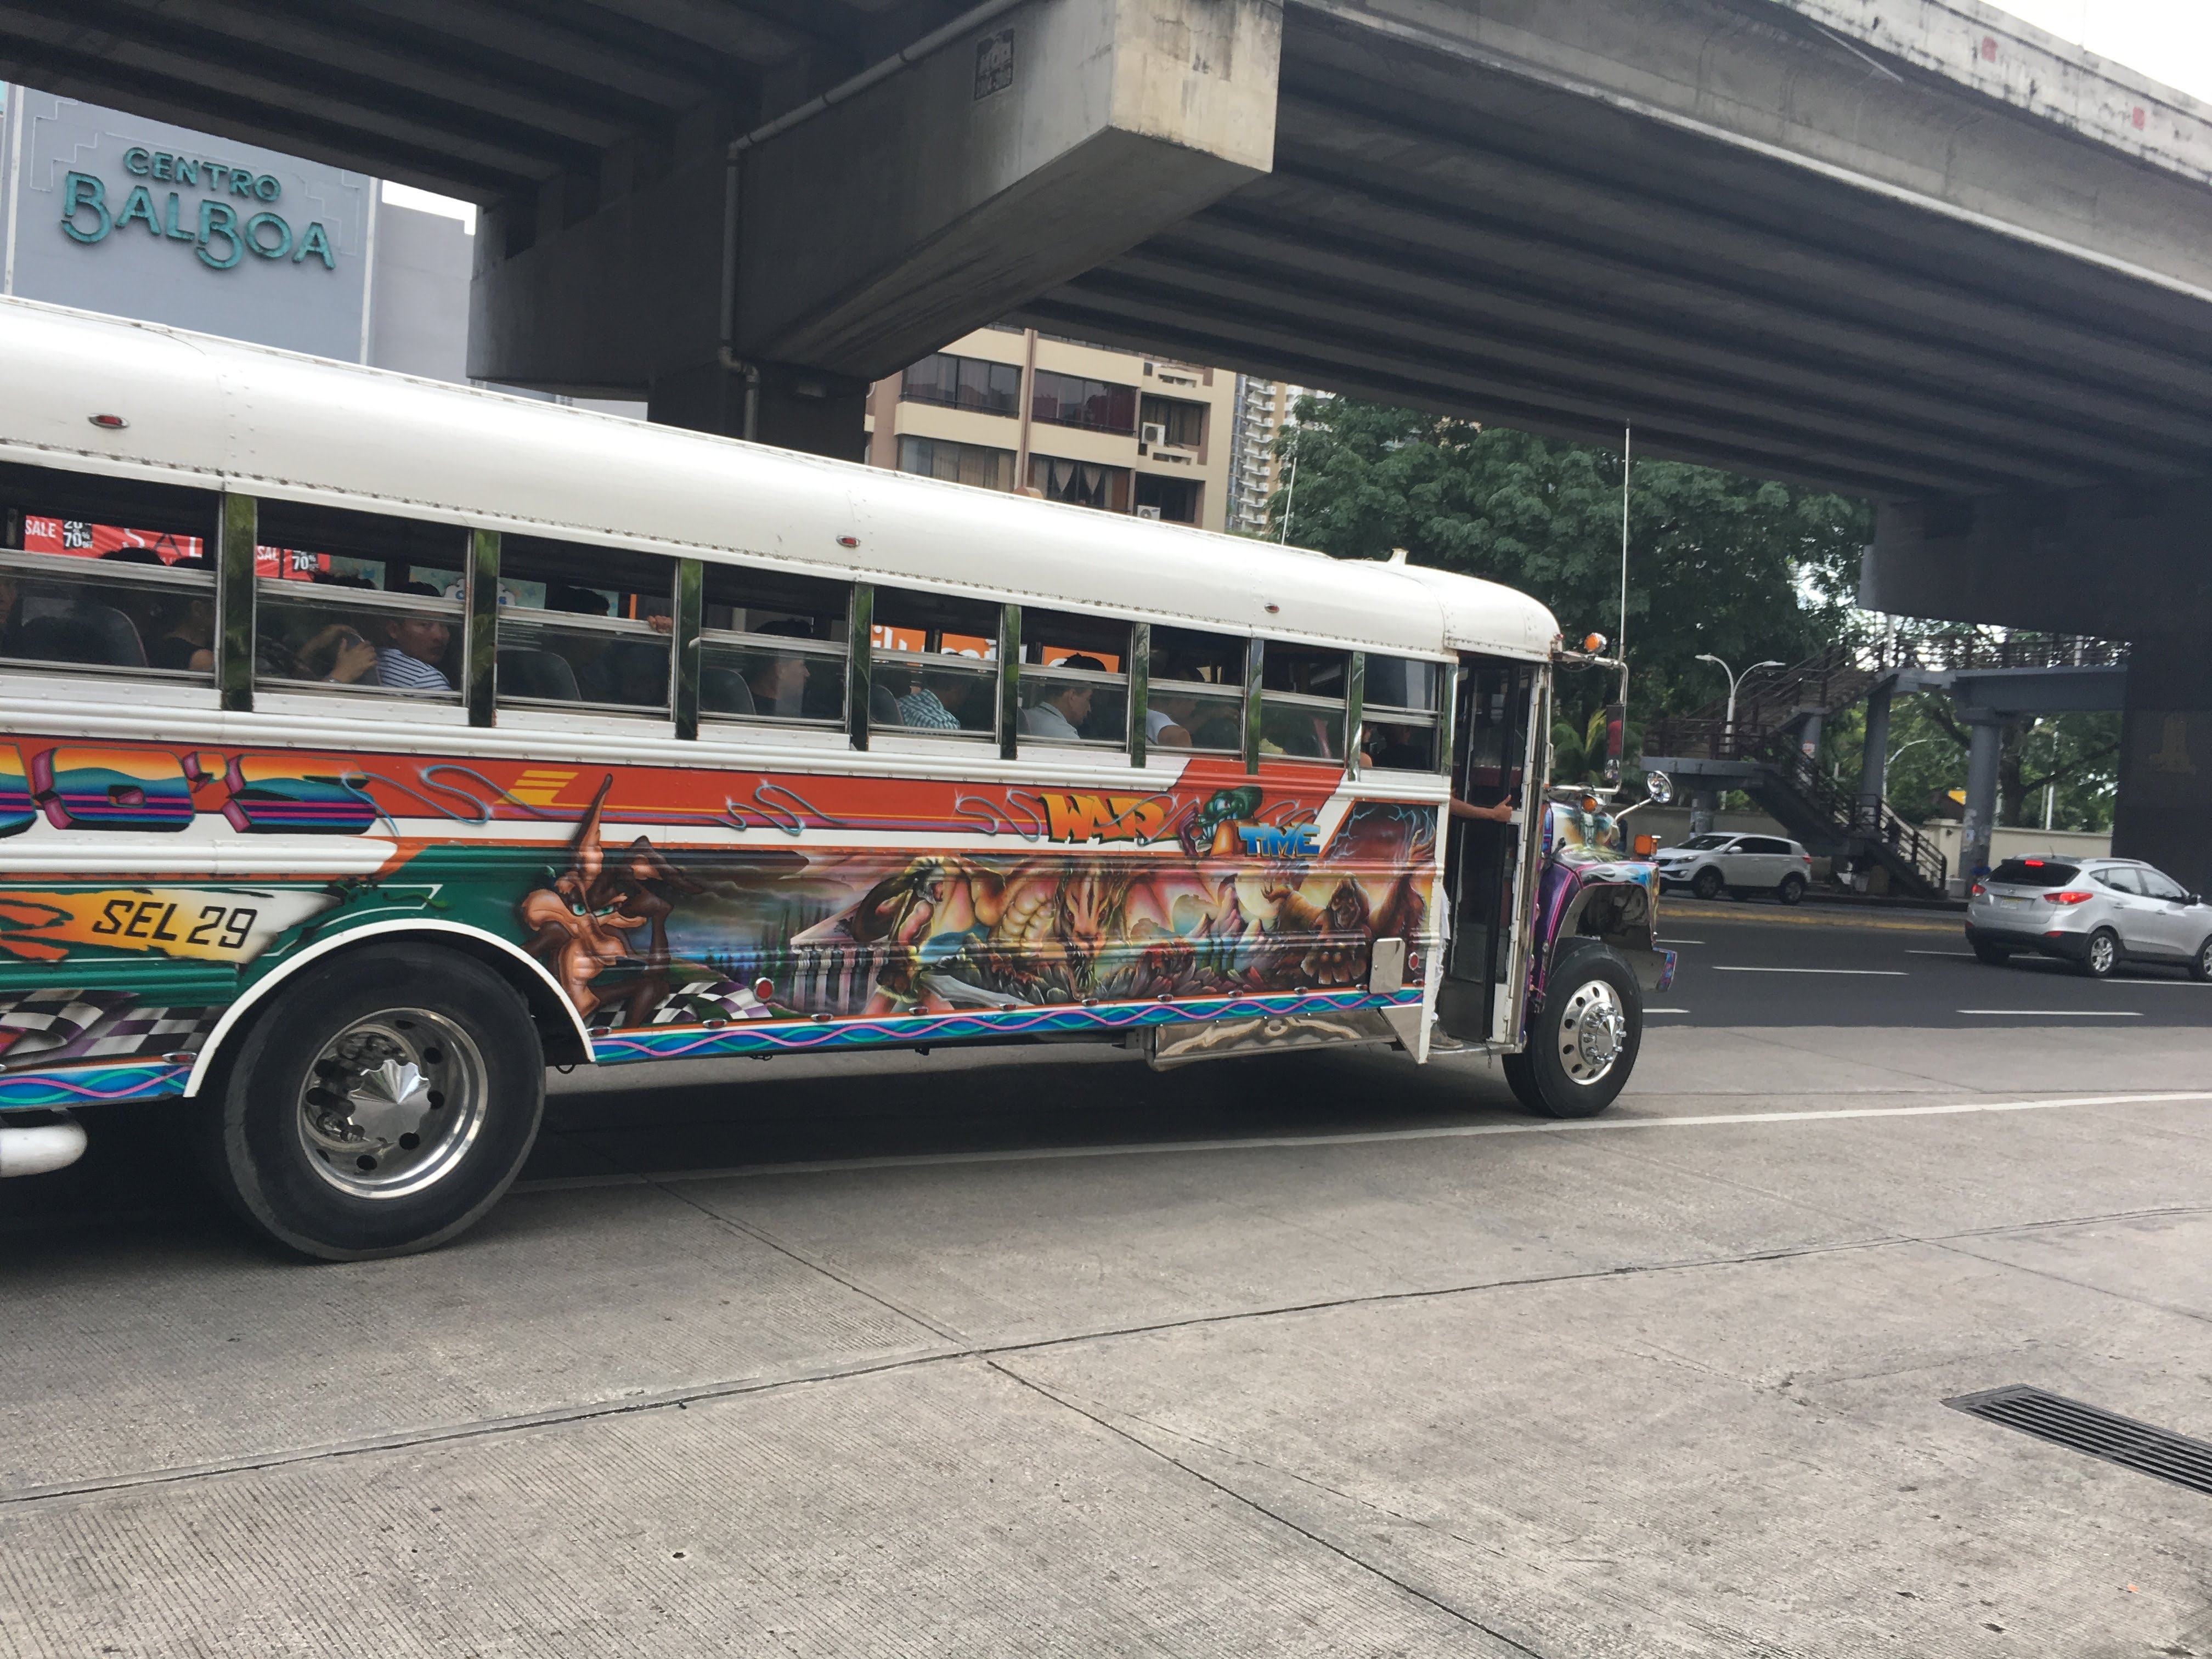 One of the Diablos Rojos buses, common in the city